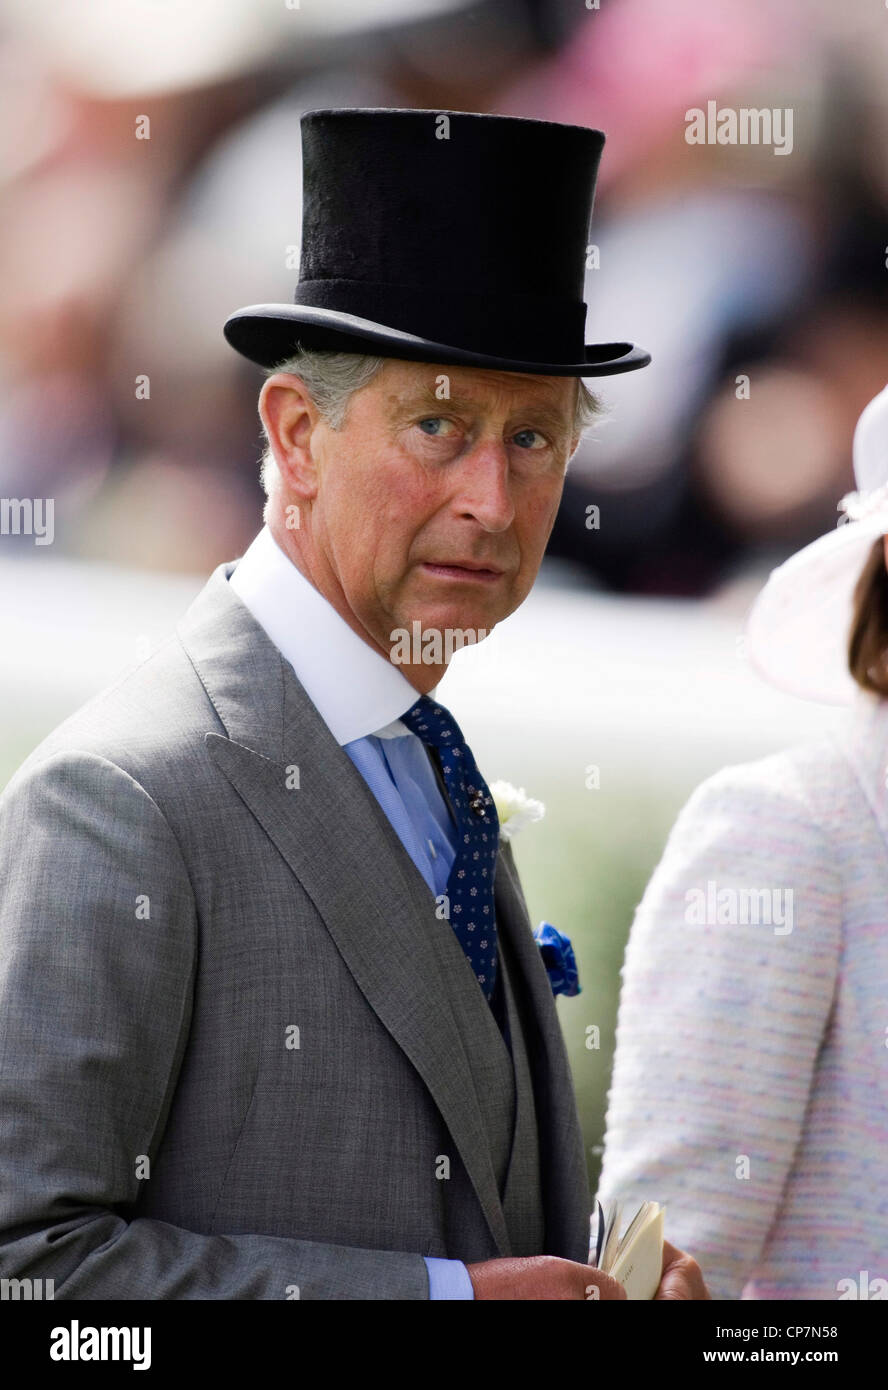 His Royal Highness Prince Charles, the Prince of Wales and Duke of ...